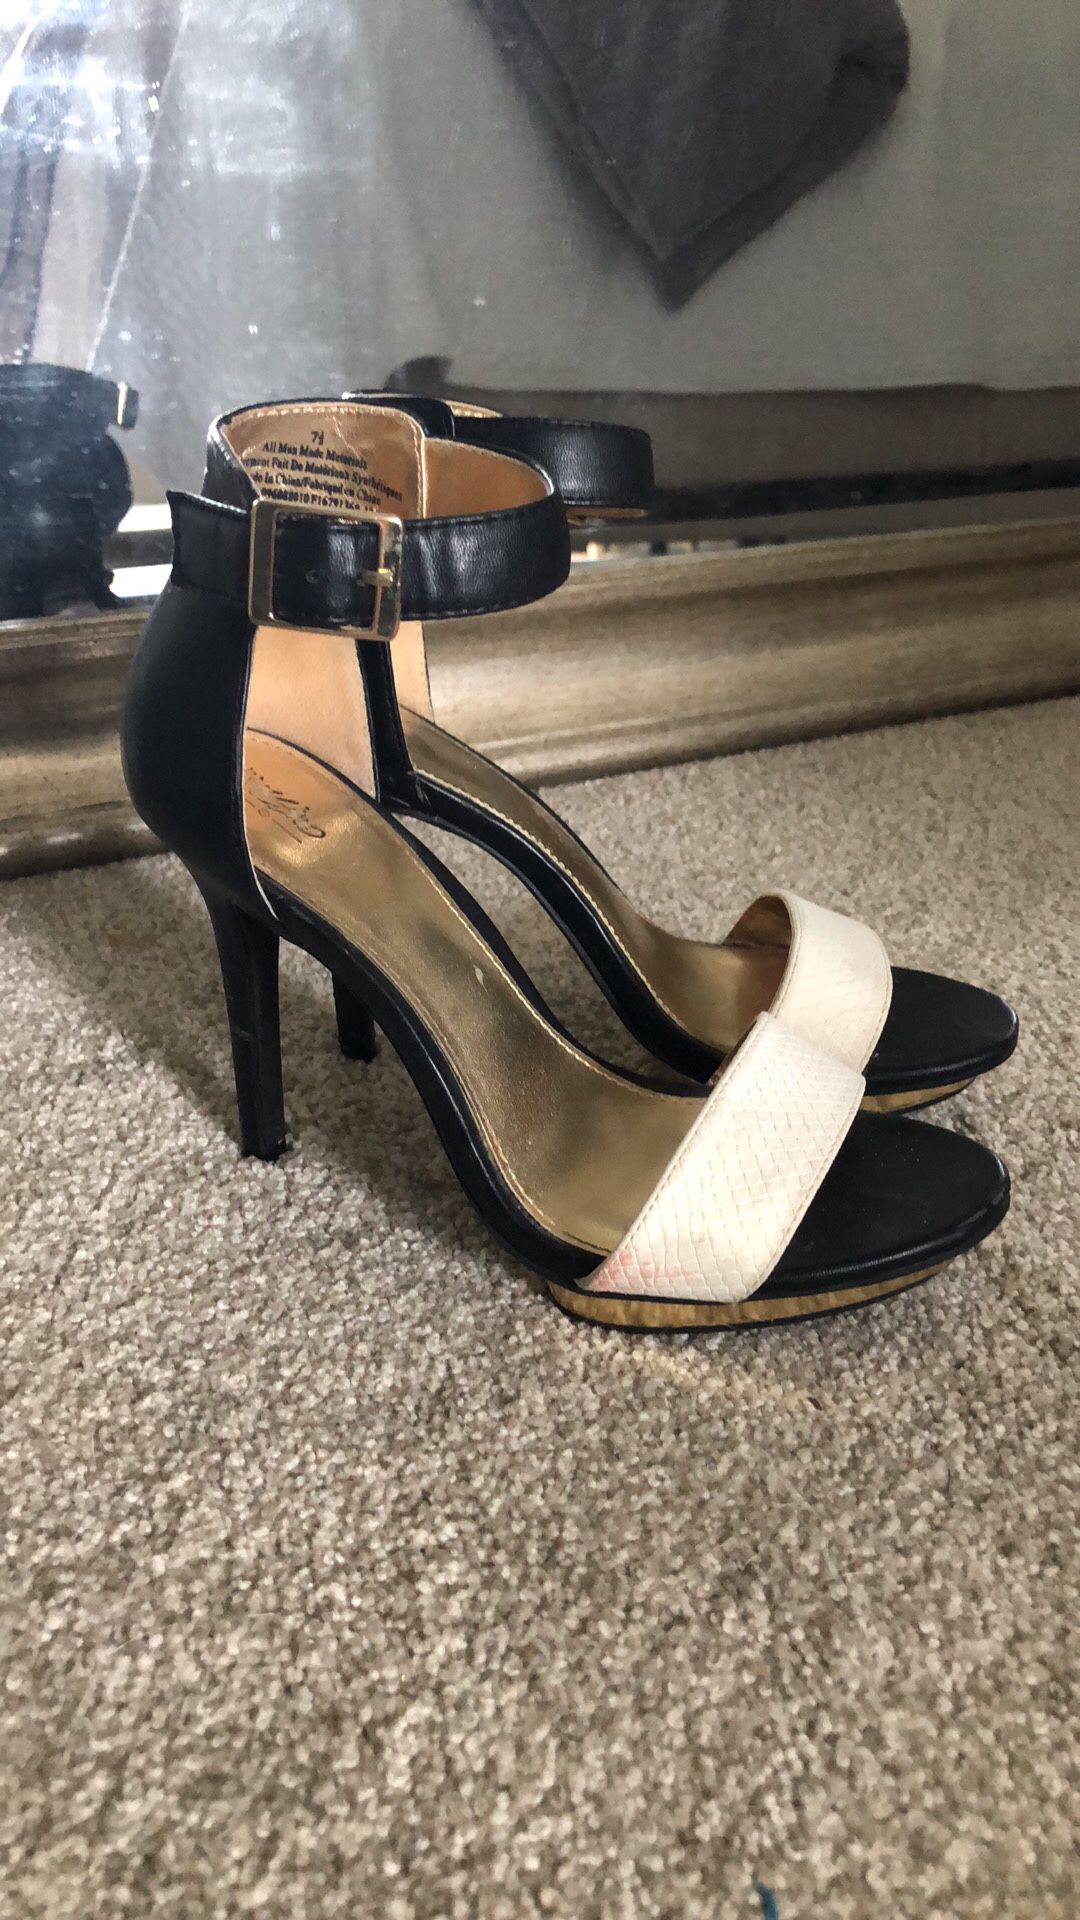 Black Heel with White Strap - size 7.5